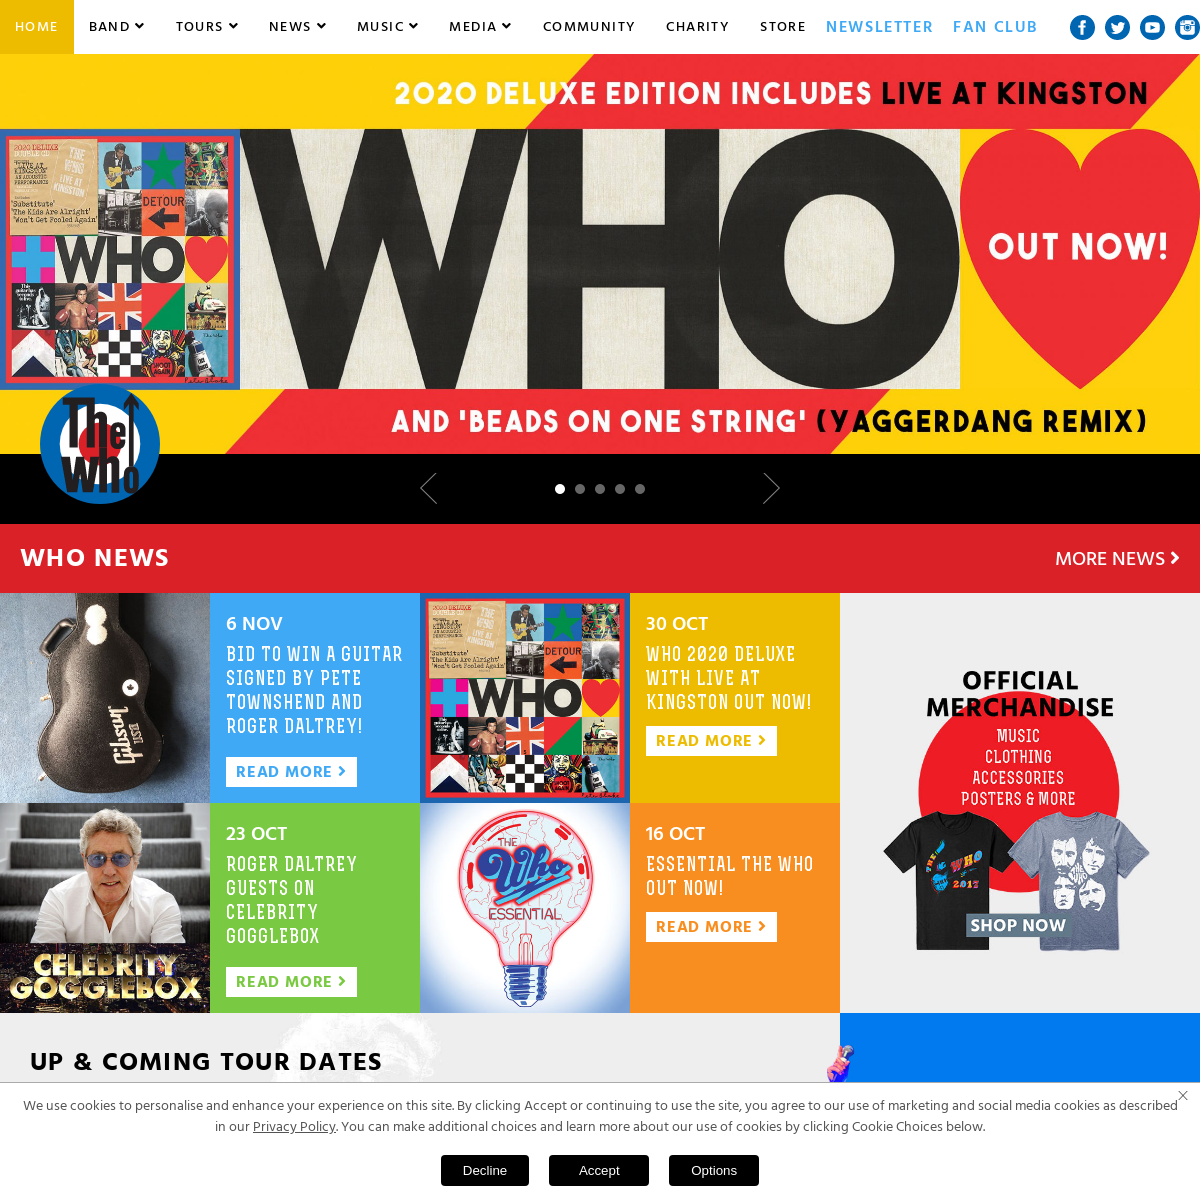 A complete backup of thewho.com